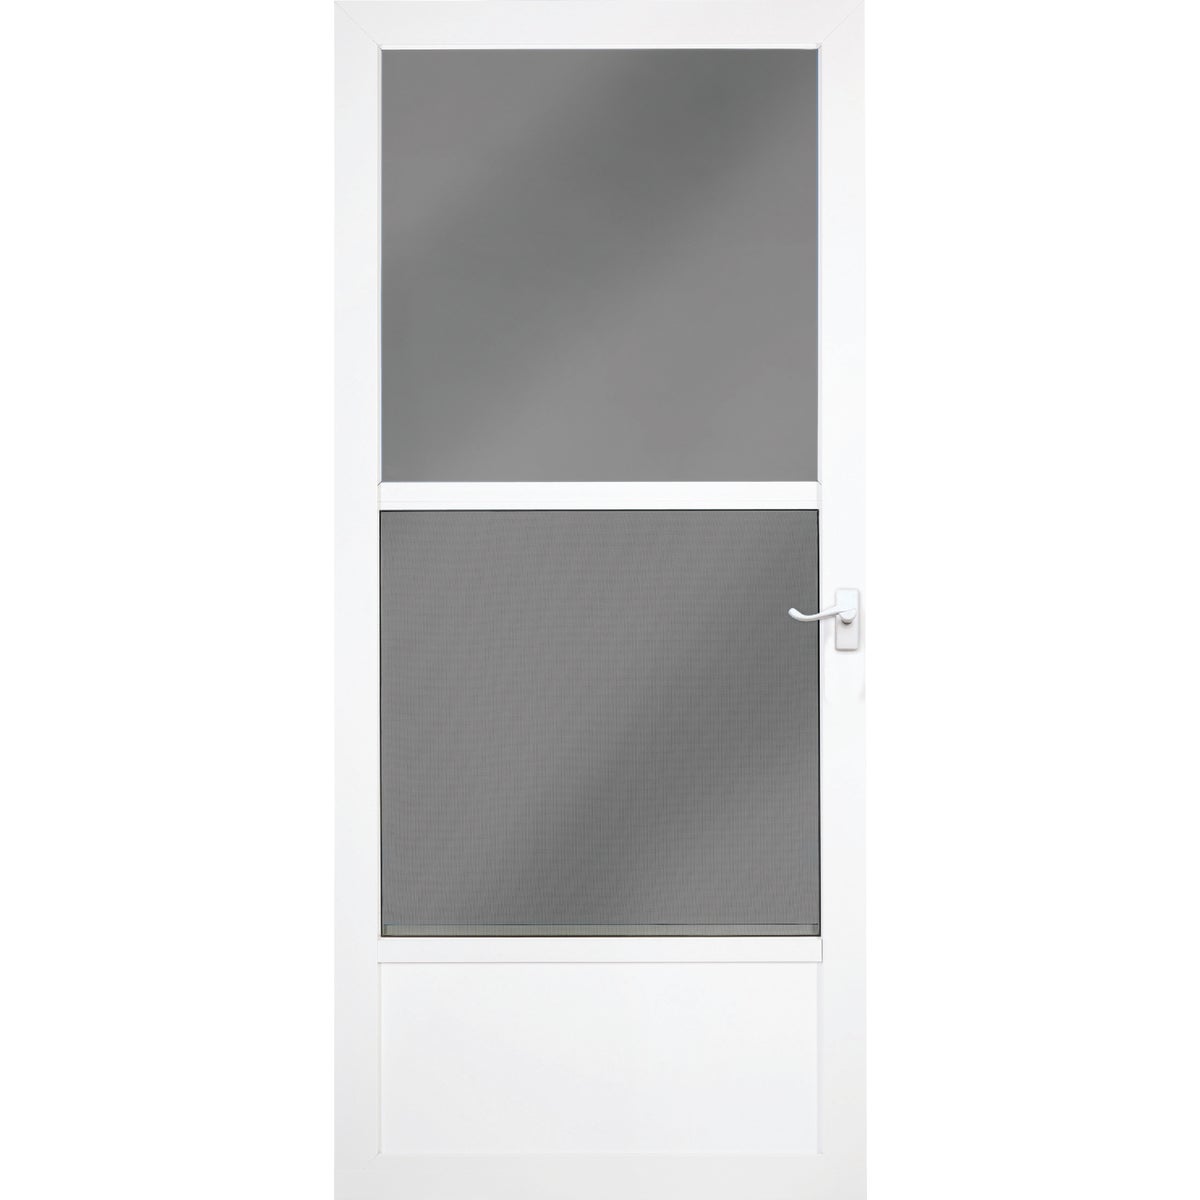 Larson Classic 32 In. W x 81 In. H x 1-1/4 In. Thick White Self-Storing Aluminum Storm Door with Matching Lever Handle